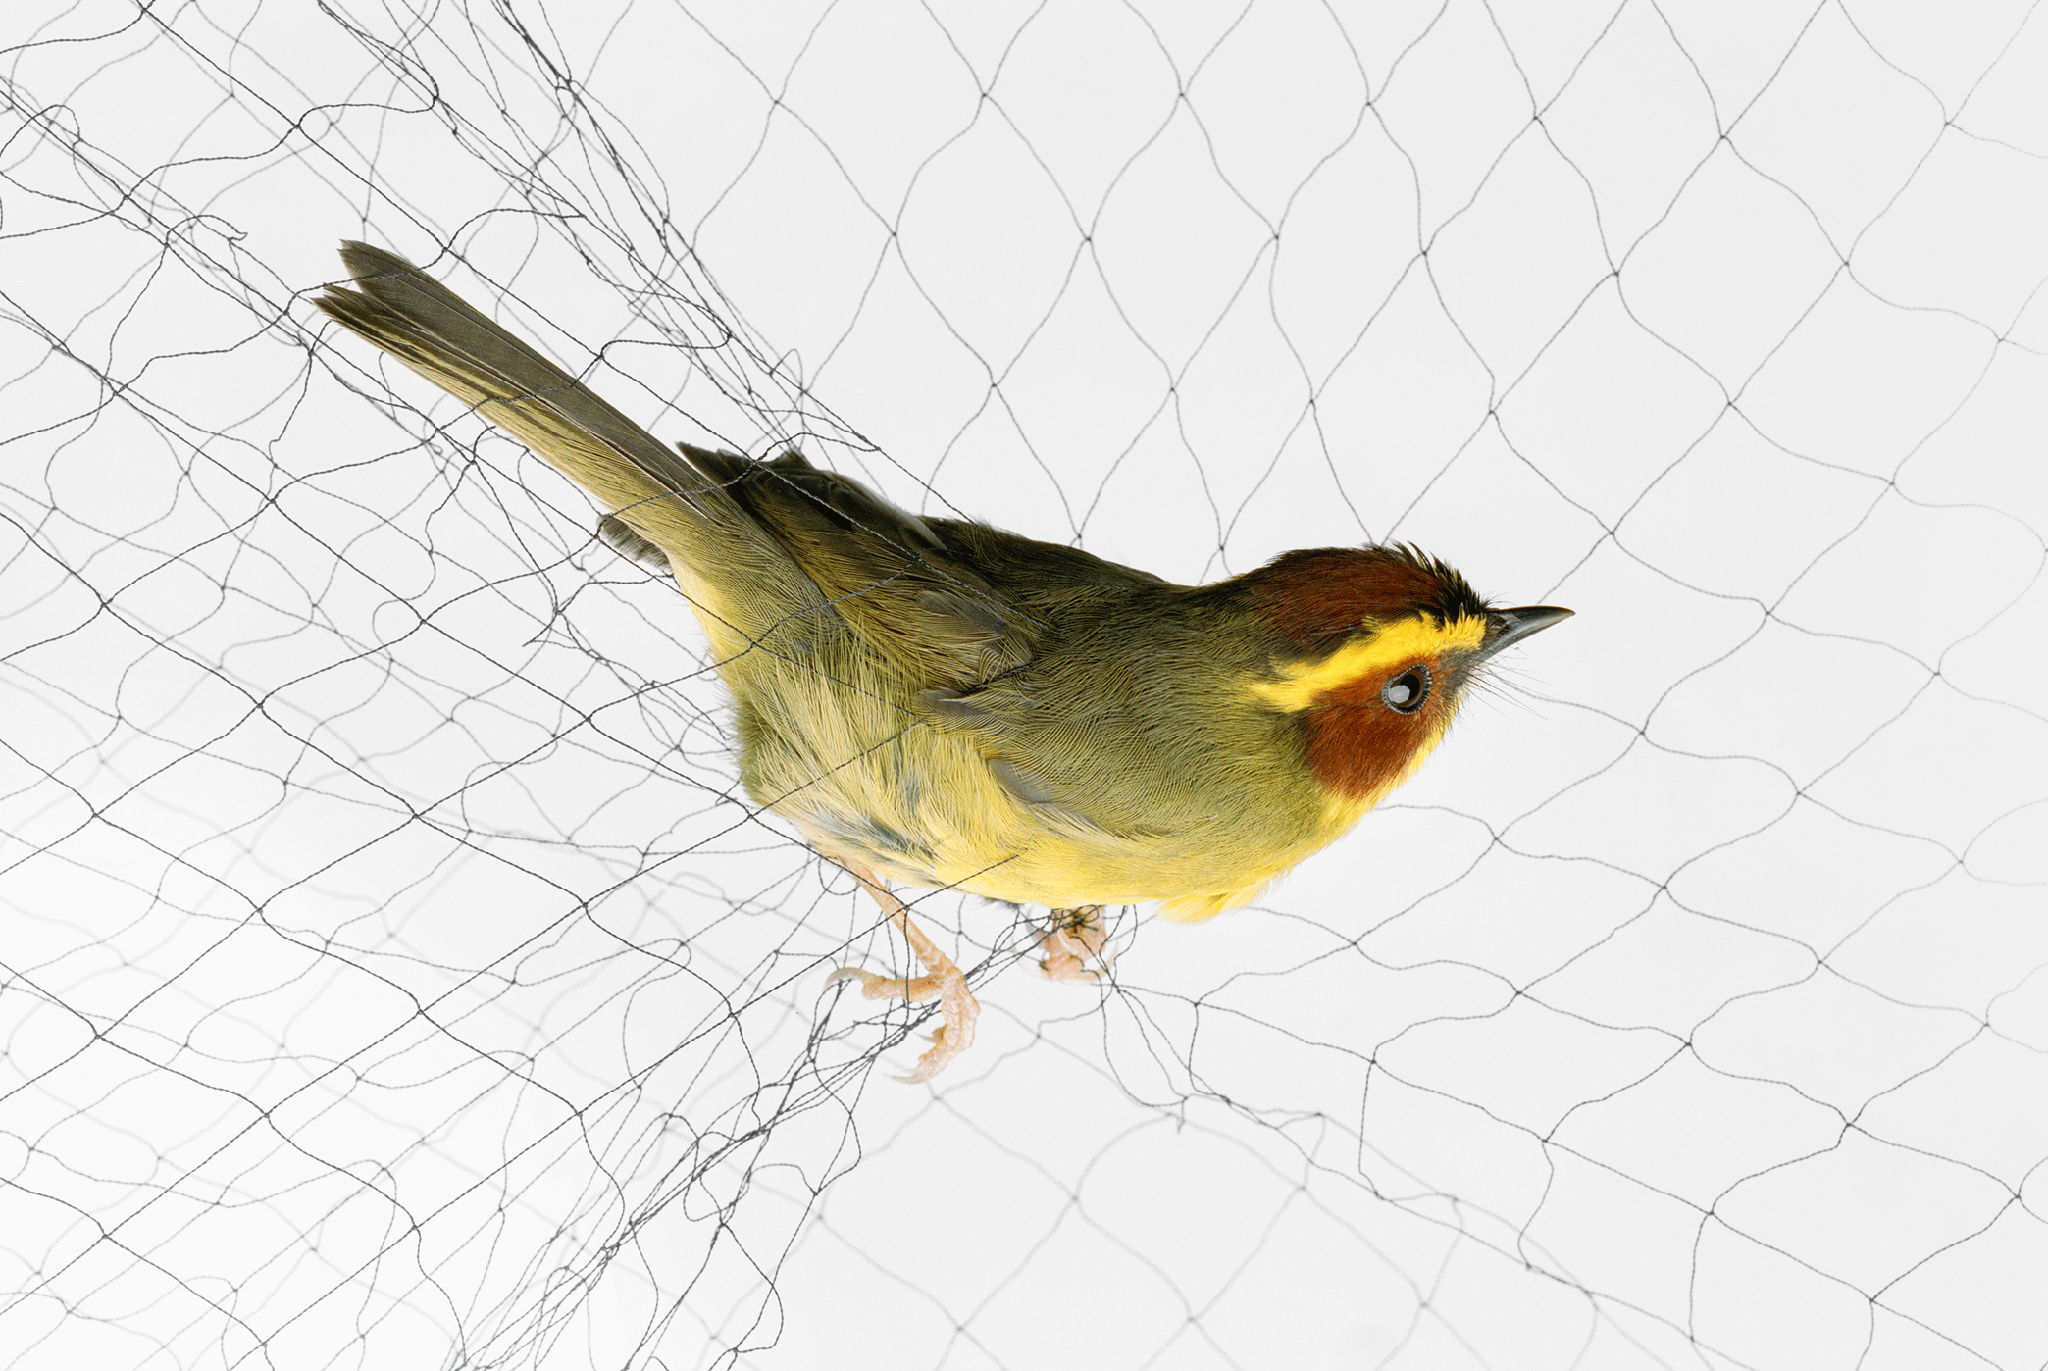 small bird caught in a net

yellow bird caught in a net

photographs by todd forsgren

do not use, only for cosmo feature use